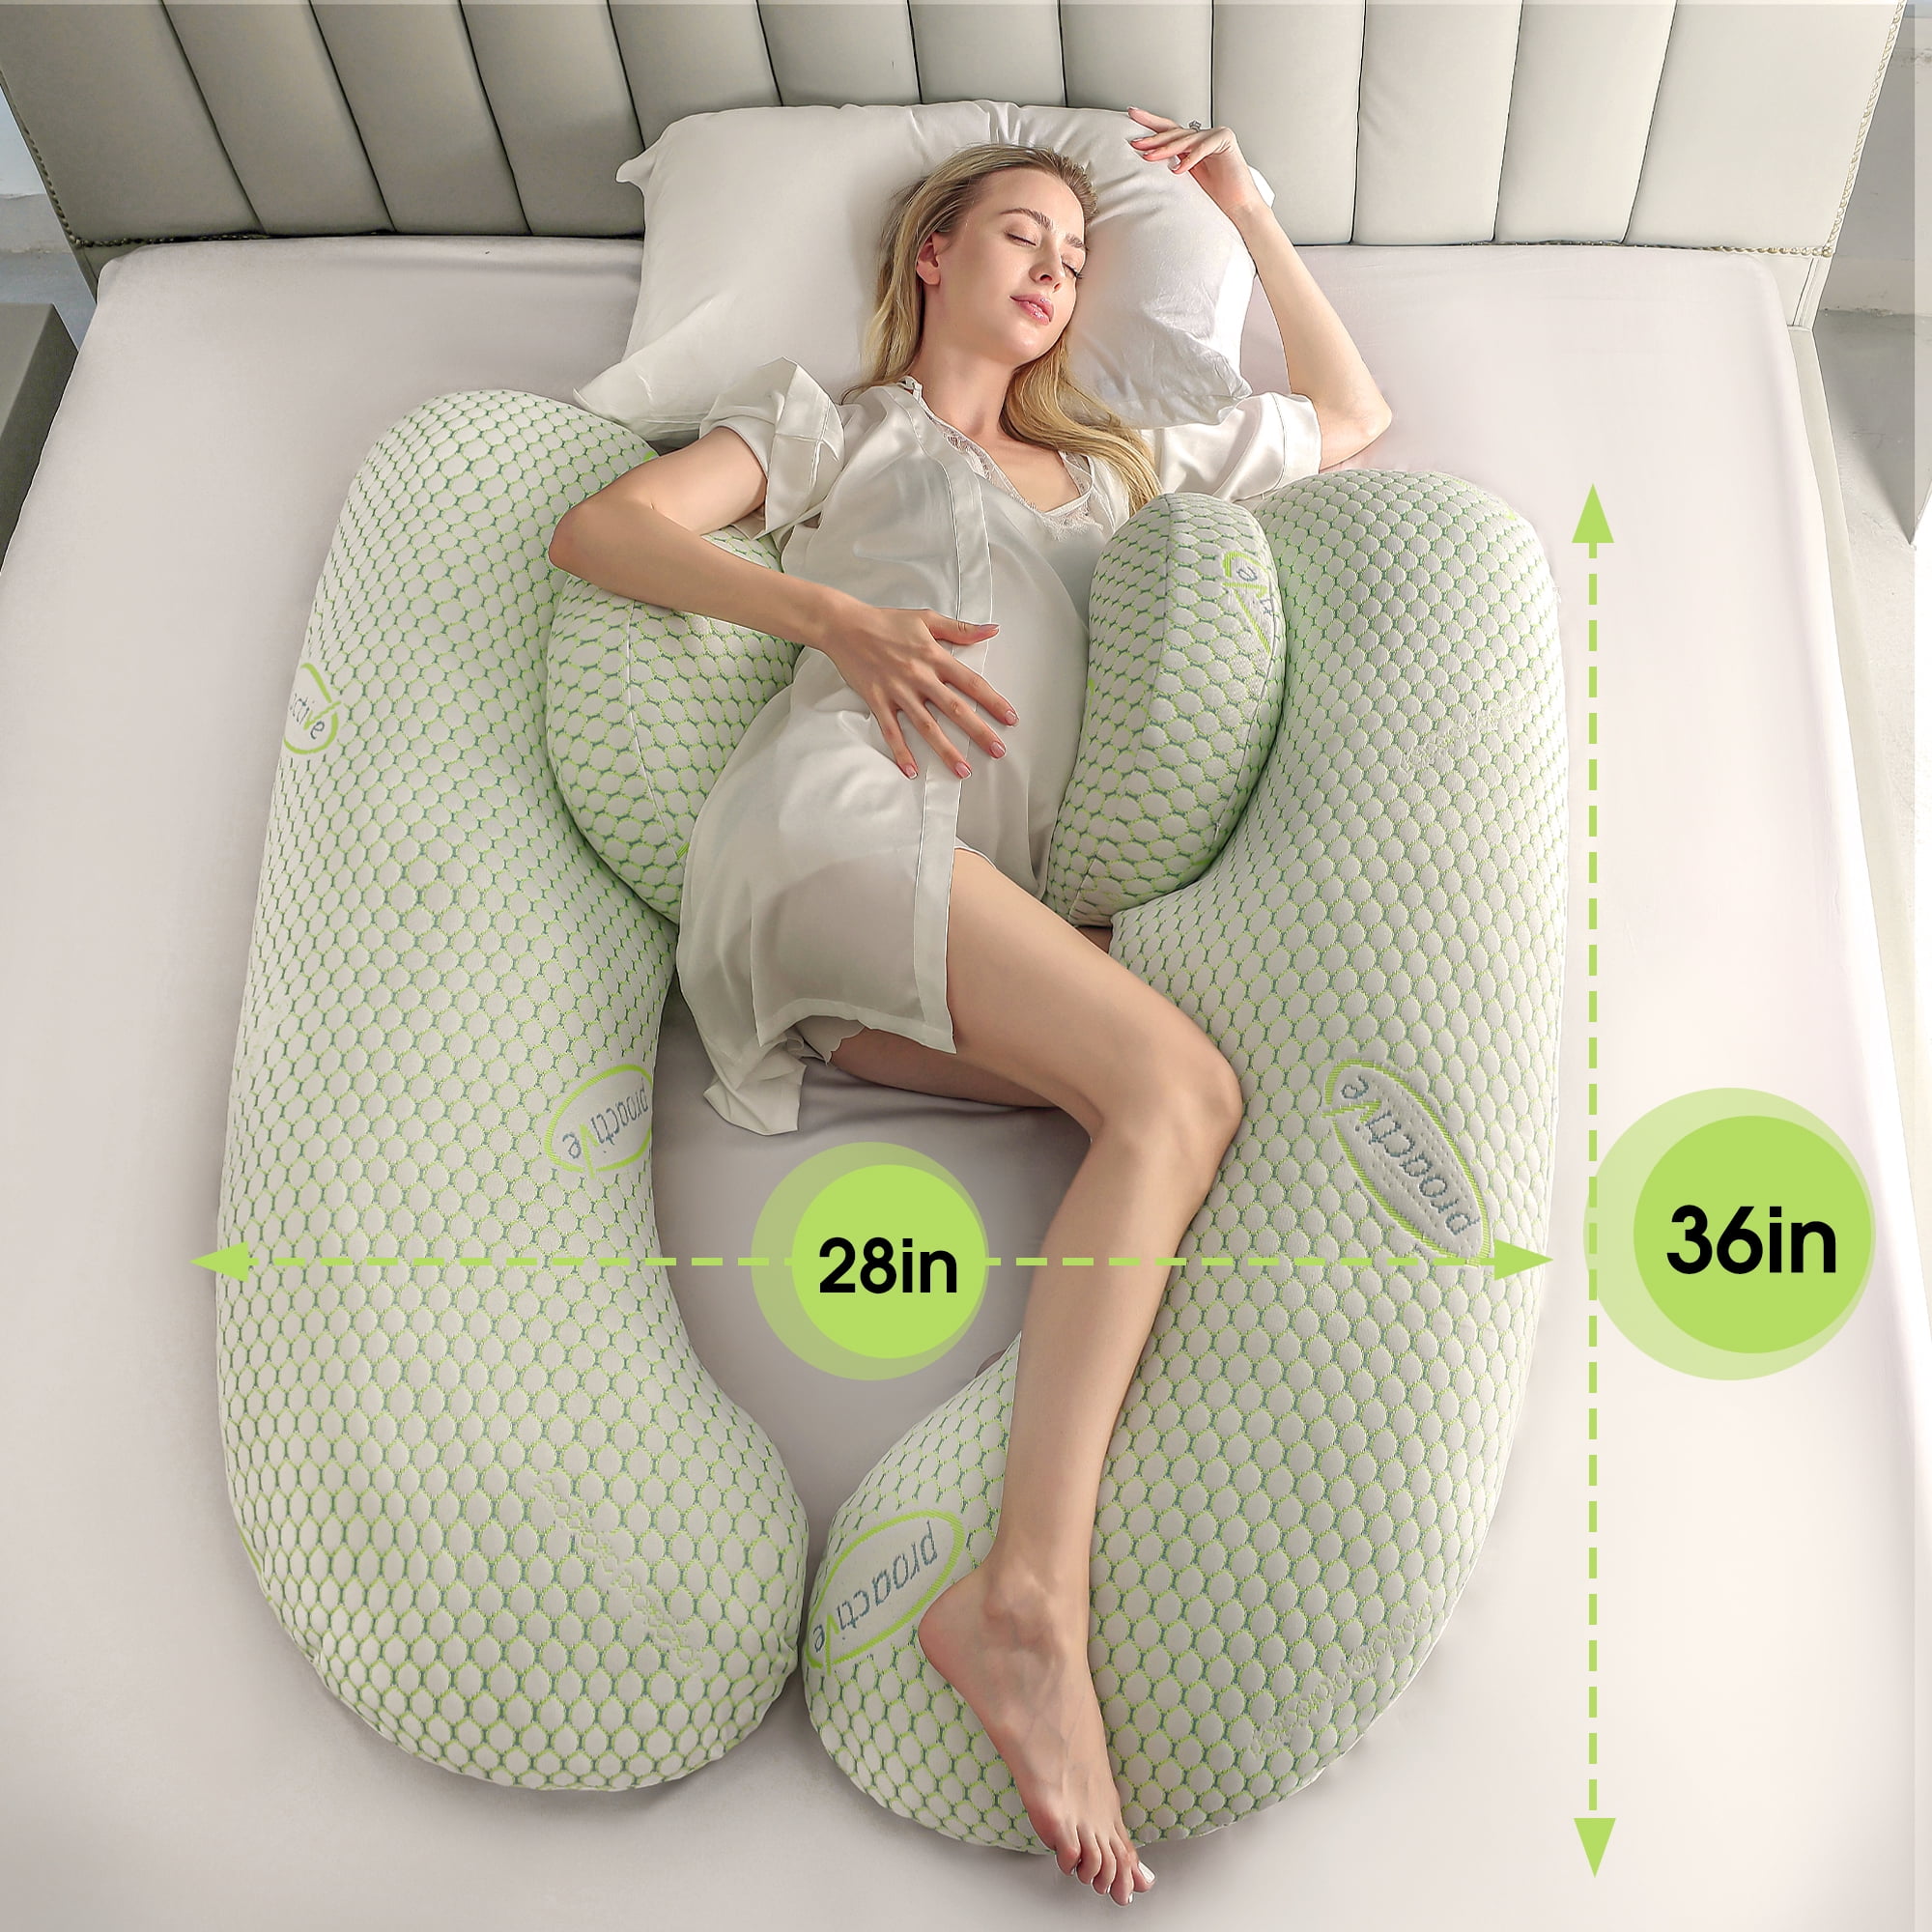 iFanze Pregnancy Pillow for Side Sleeper, Adjustable Double Wedge